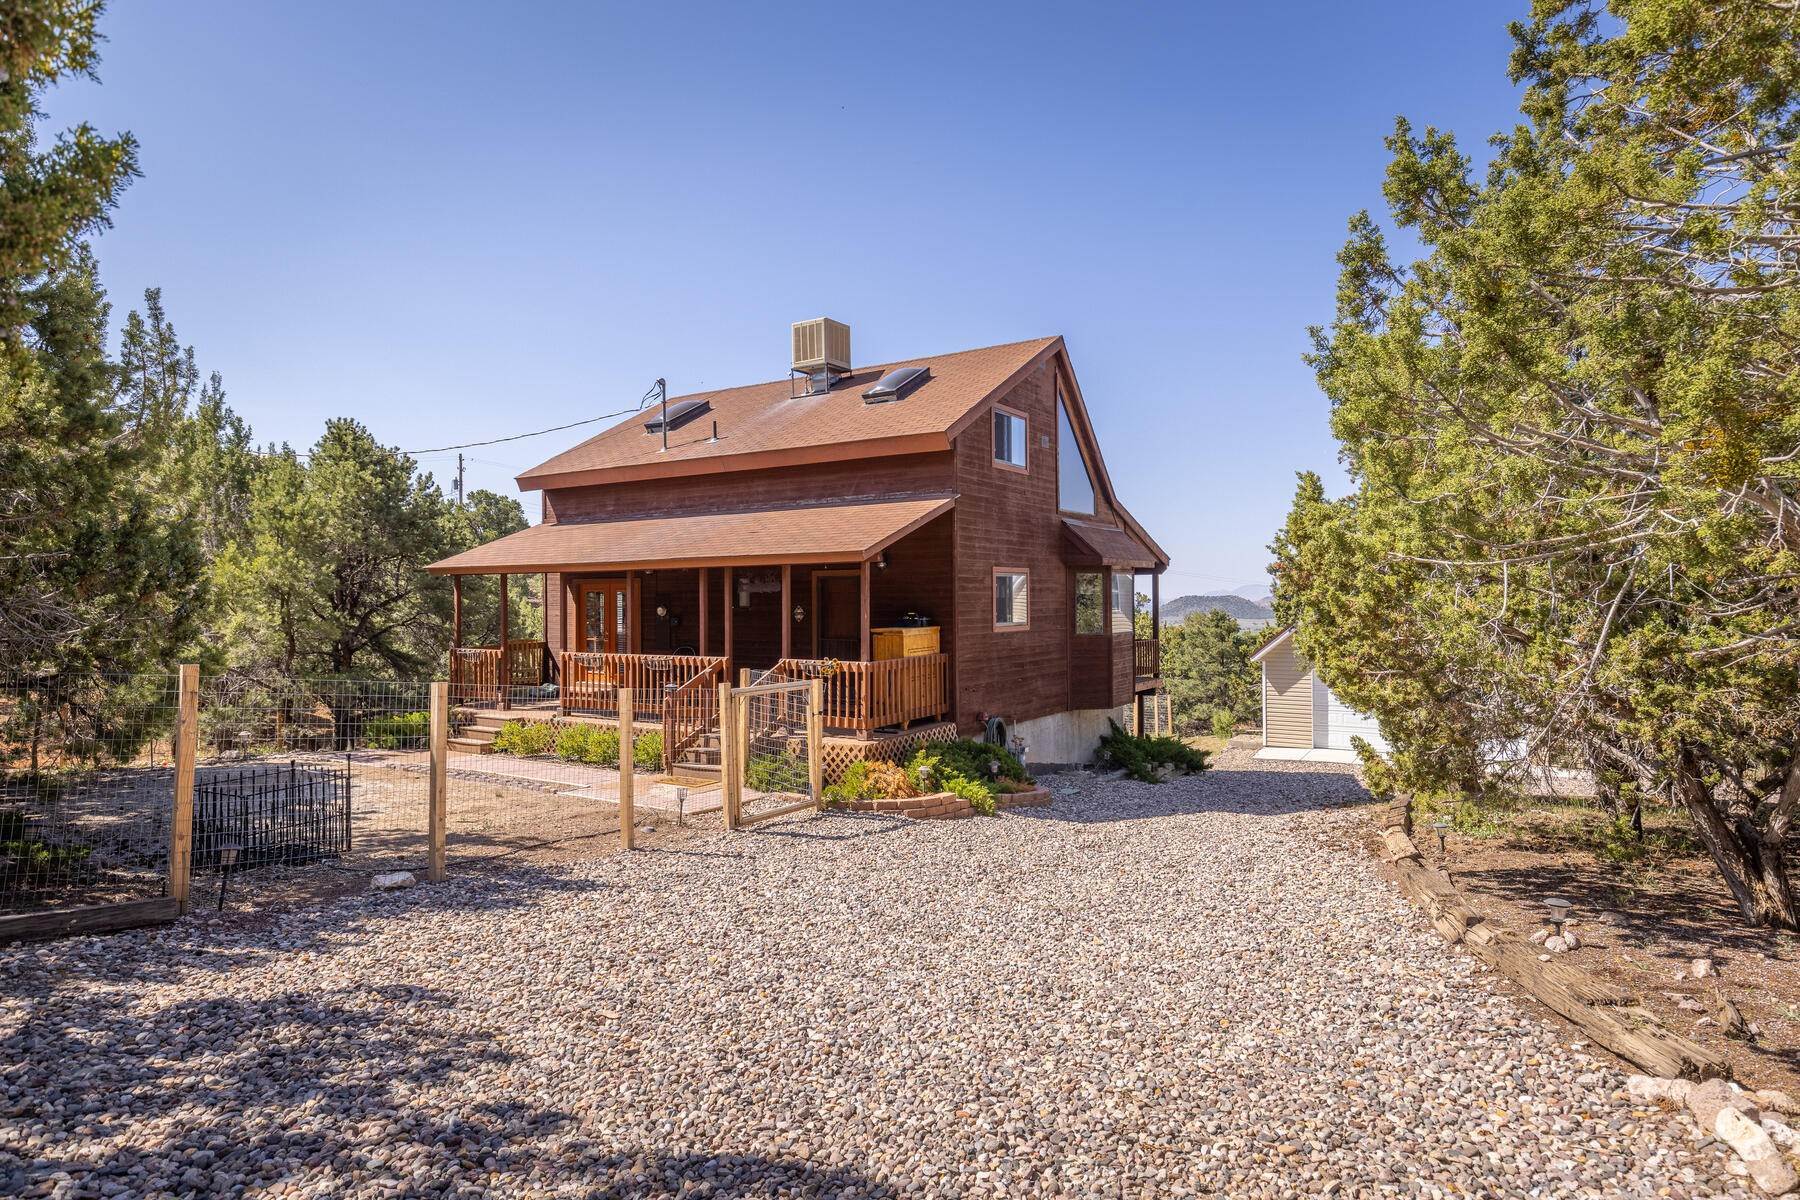 Property for Sale at Cozy Cabin In Central 682 E Mule Deer Road Central, Utah 84722 United States